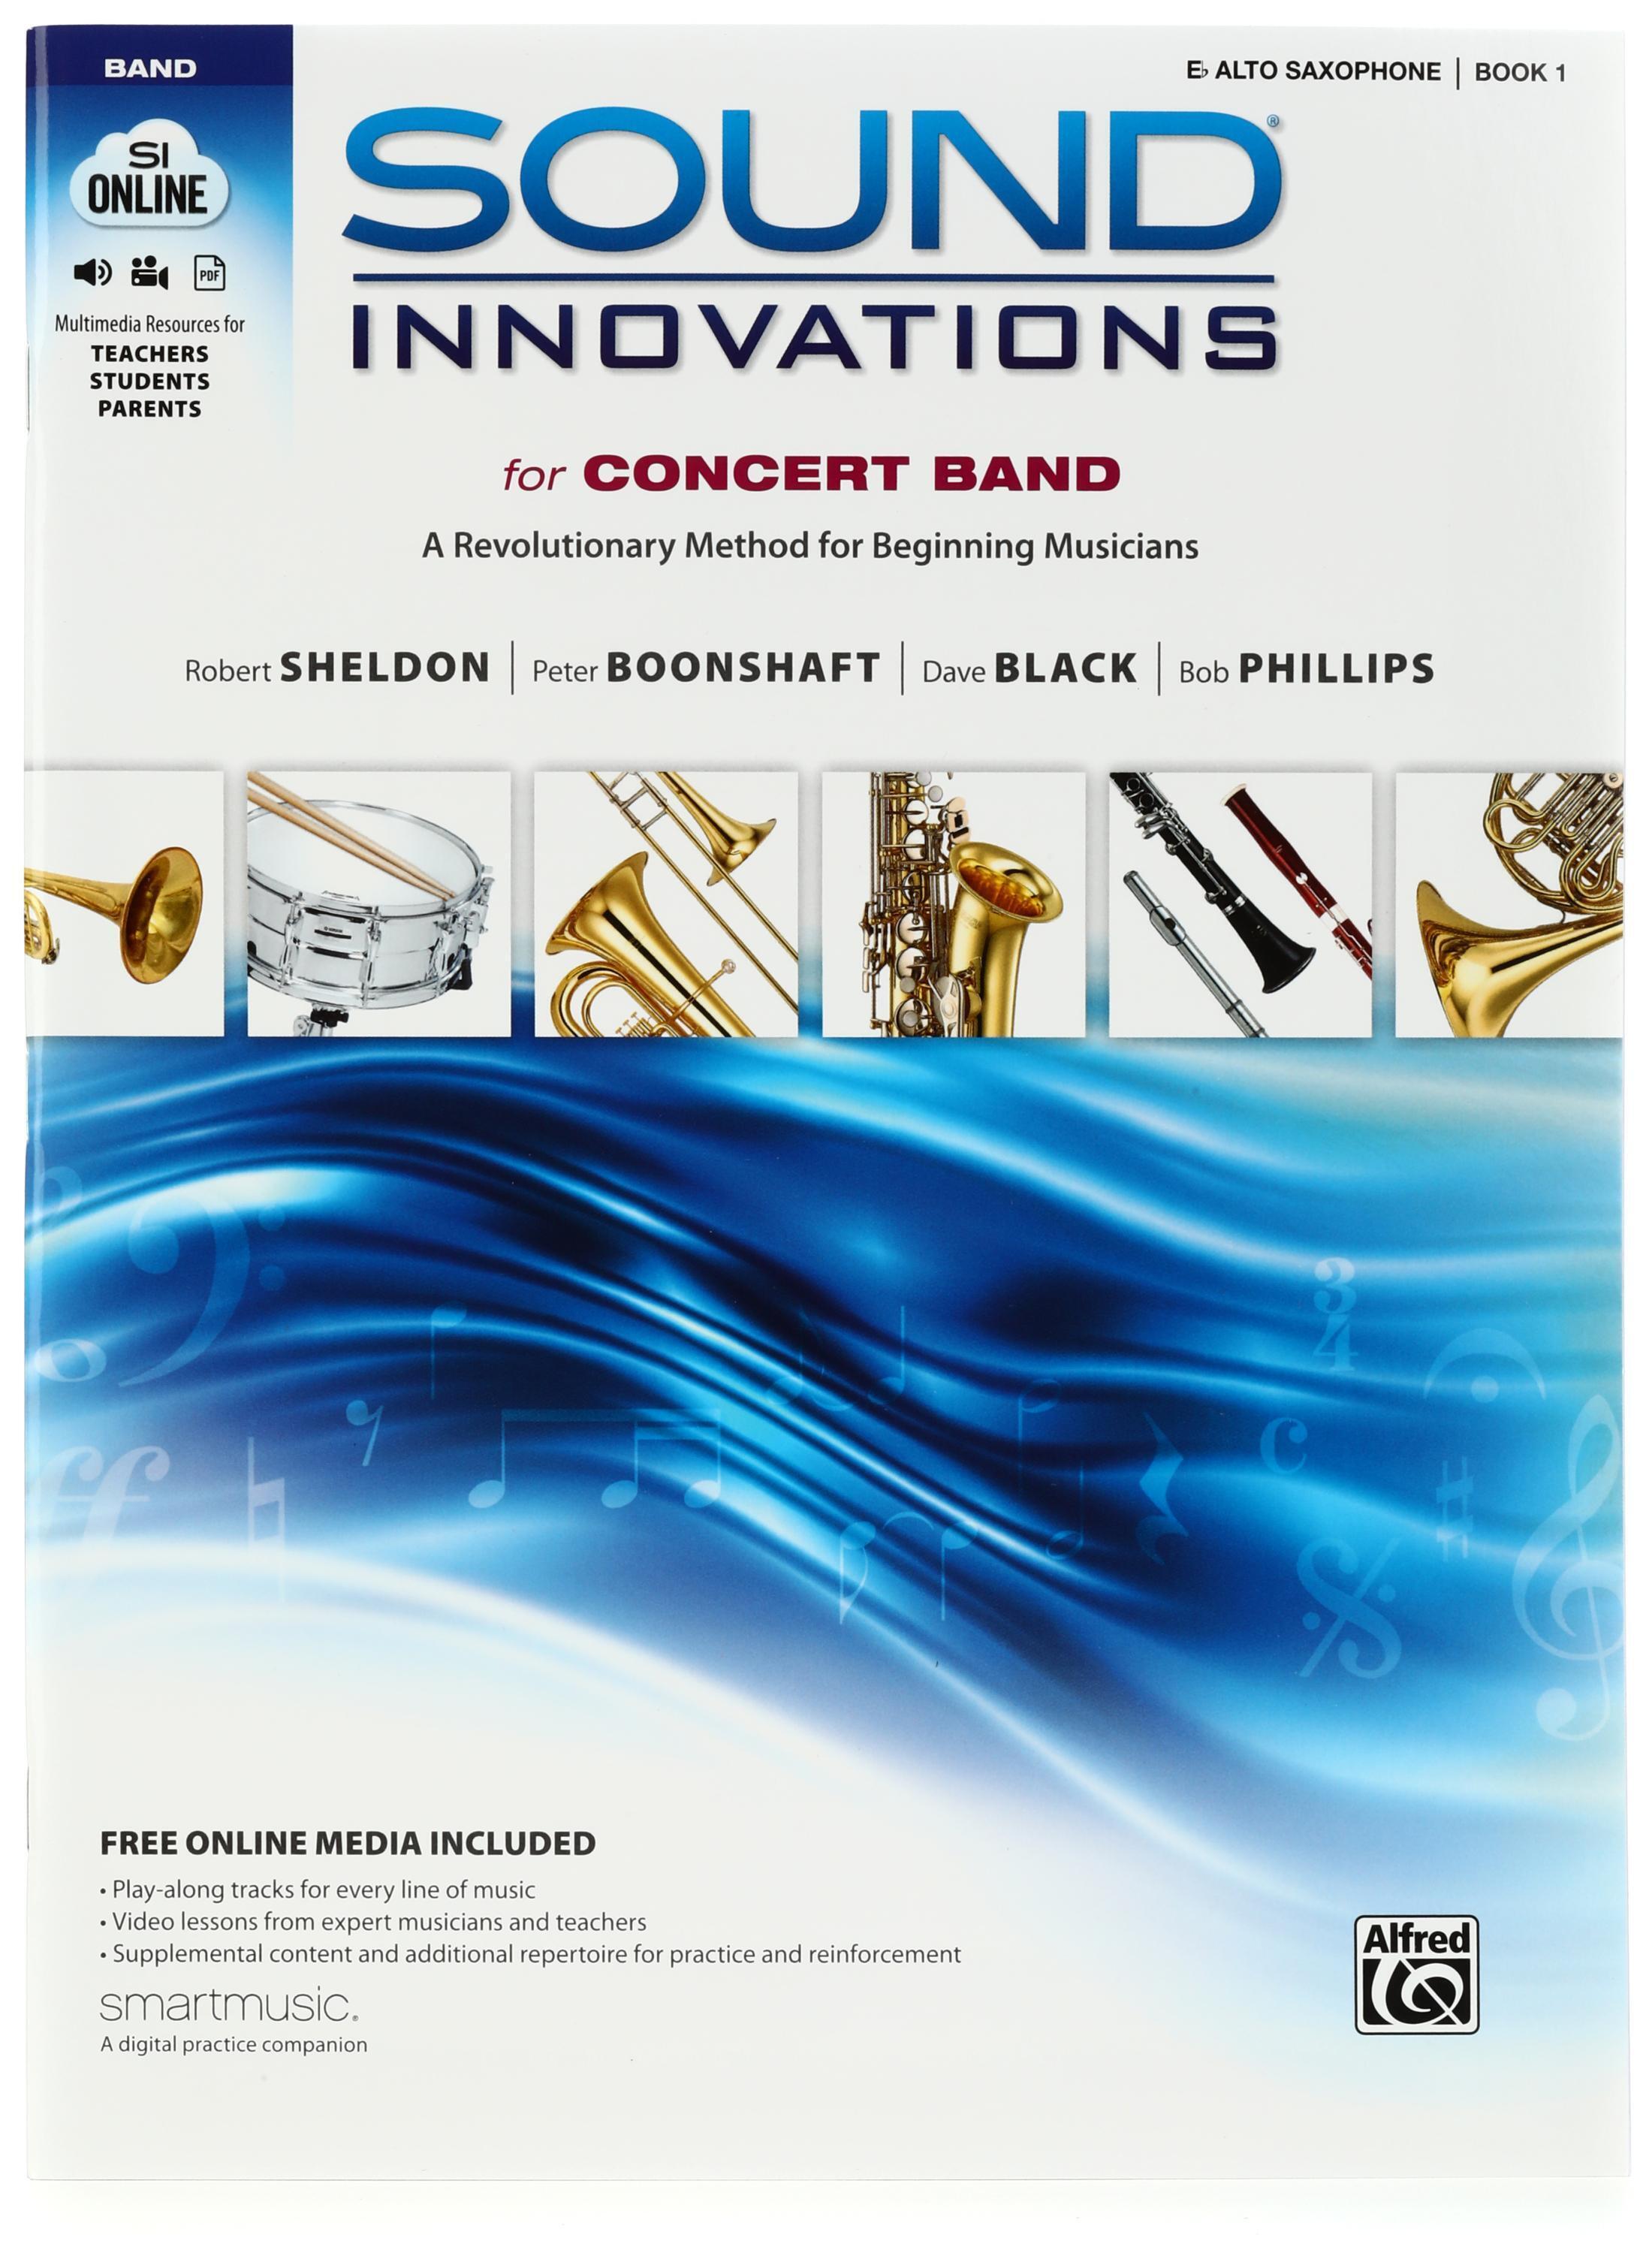 Book　Concert　Alfred　Band　Saxophone　Innovations　Sound　Alto　for　Sweetwater